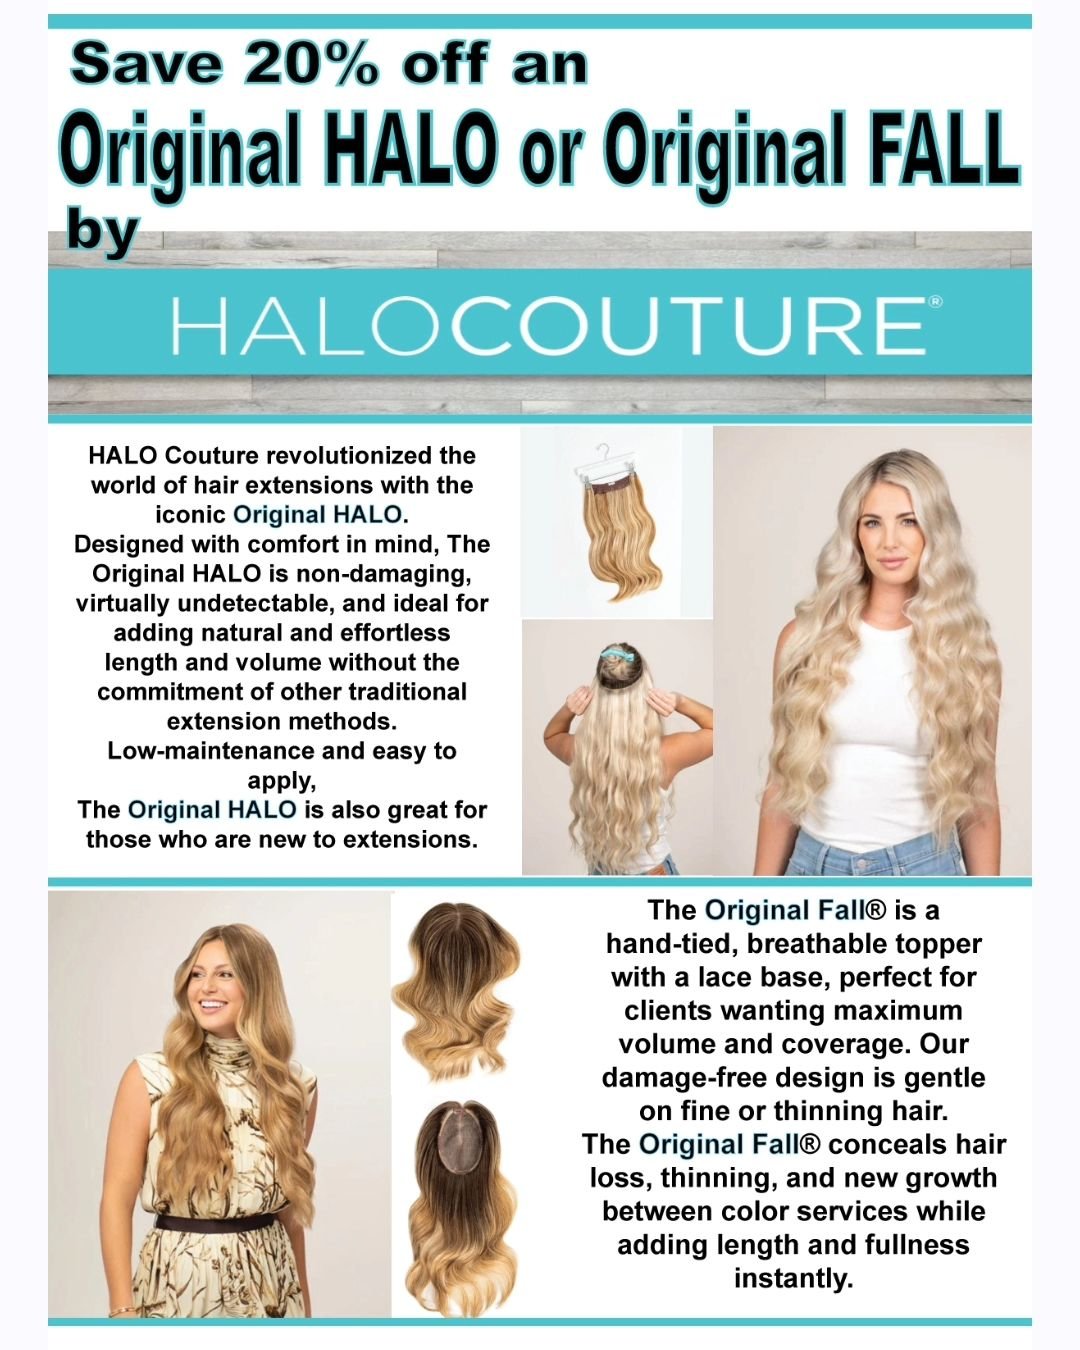 It's the season of proms, graduations, and weddings. Our extension specialist, Hope, is offering 20% off a Halo Couture Original Halo or Original Fall. Book an extension consultation to match your color and order your hair today at
 https://balanceha